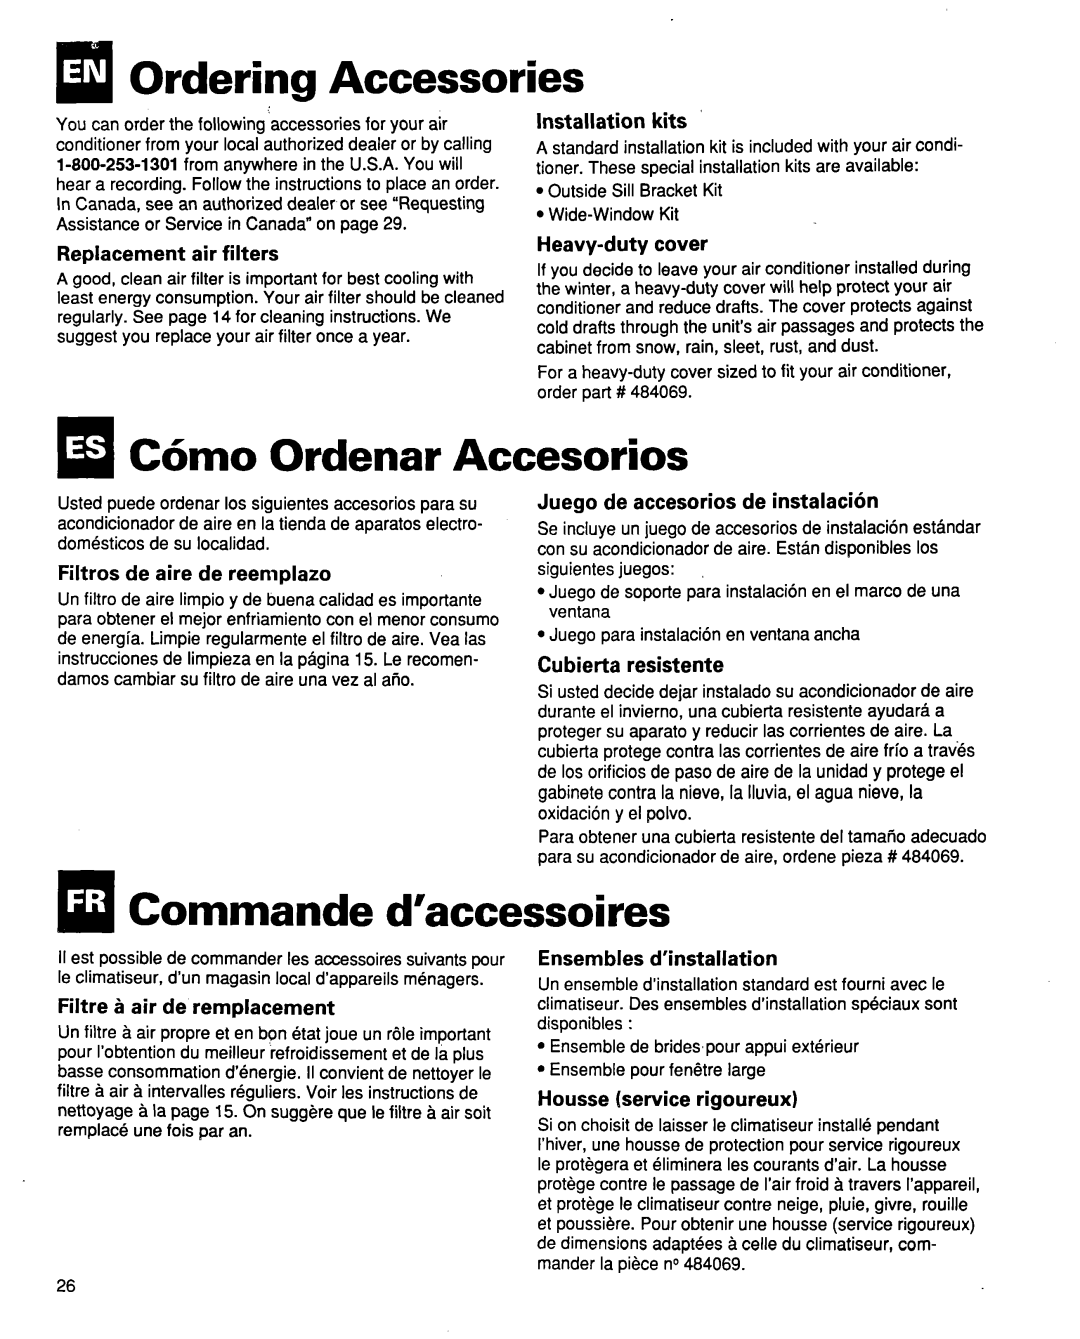 Whirlpool ACQ254XF0 manual I#!Ordering Accessories, Ordenar Accesorios, Commande d’accessoires, Installation kits 